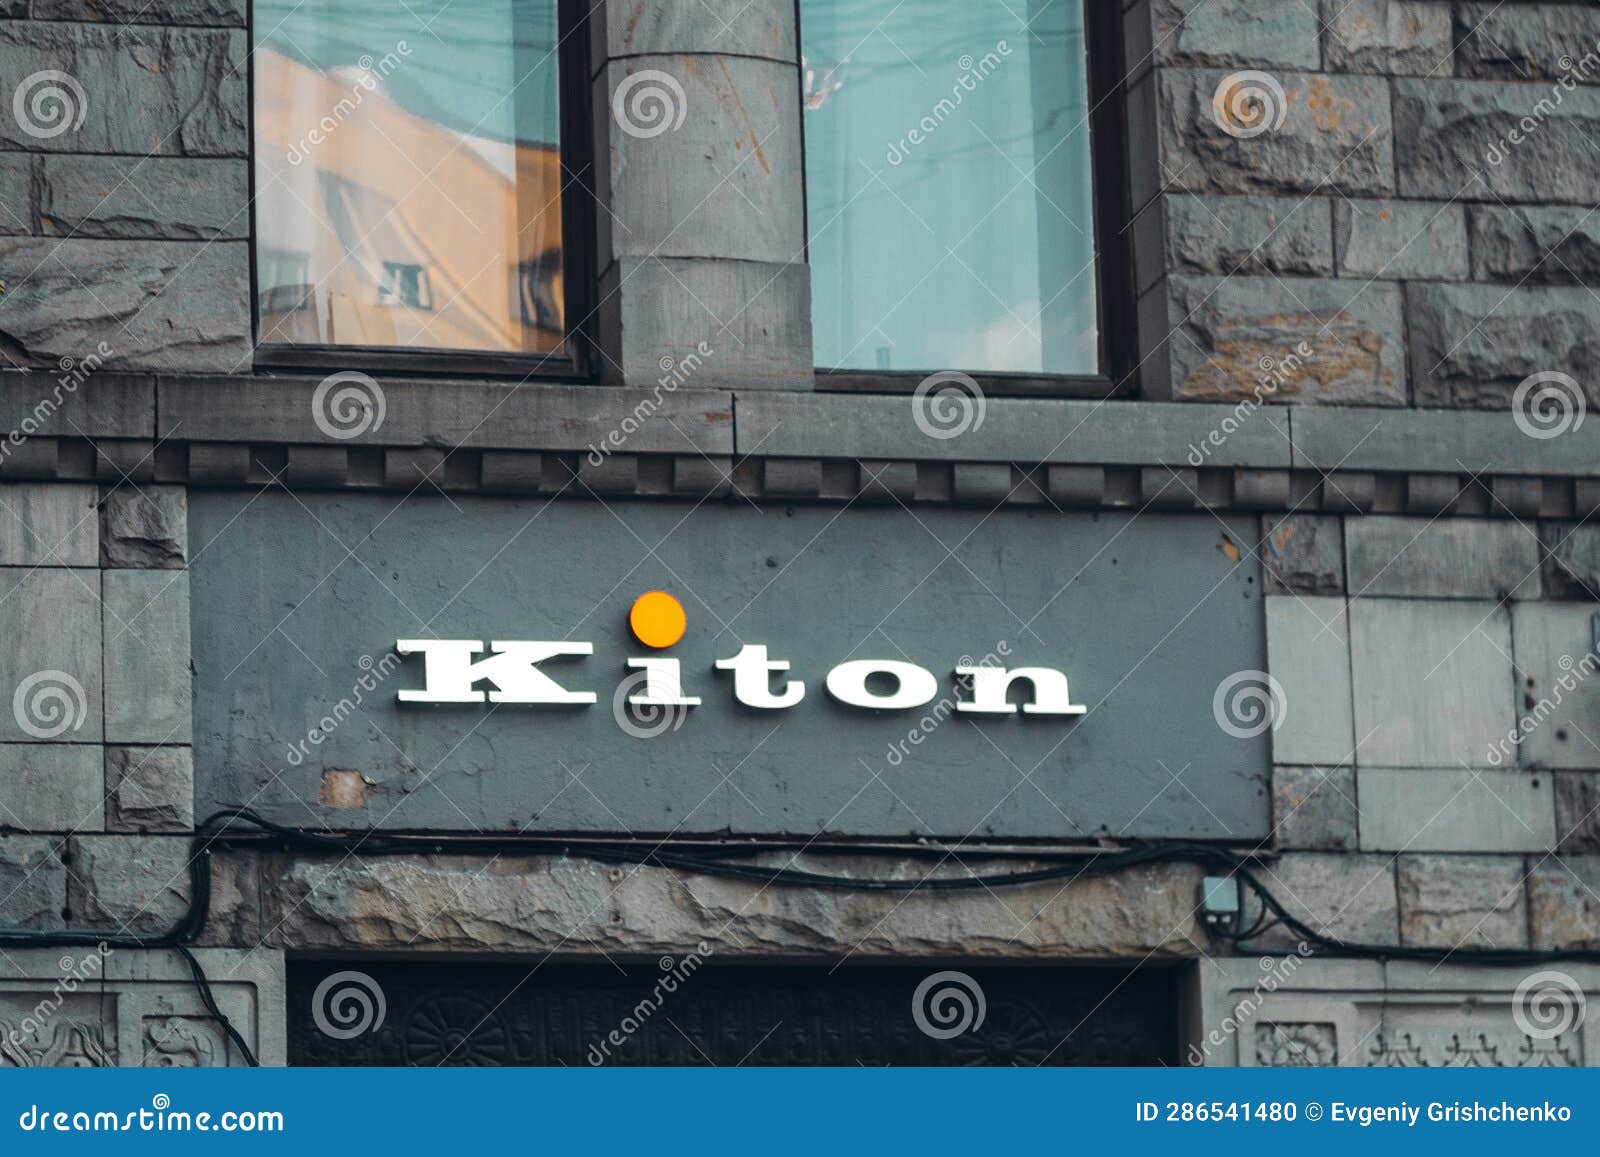 Kiton Brand Sign Clothing Store Editorial Image - Image of commercial ...